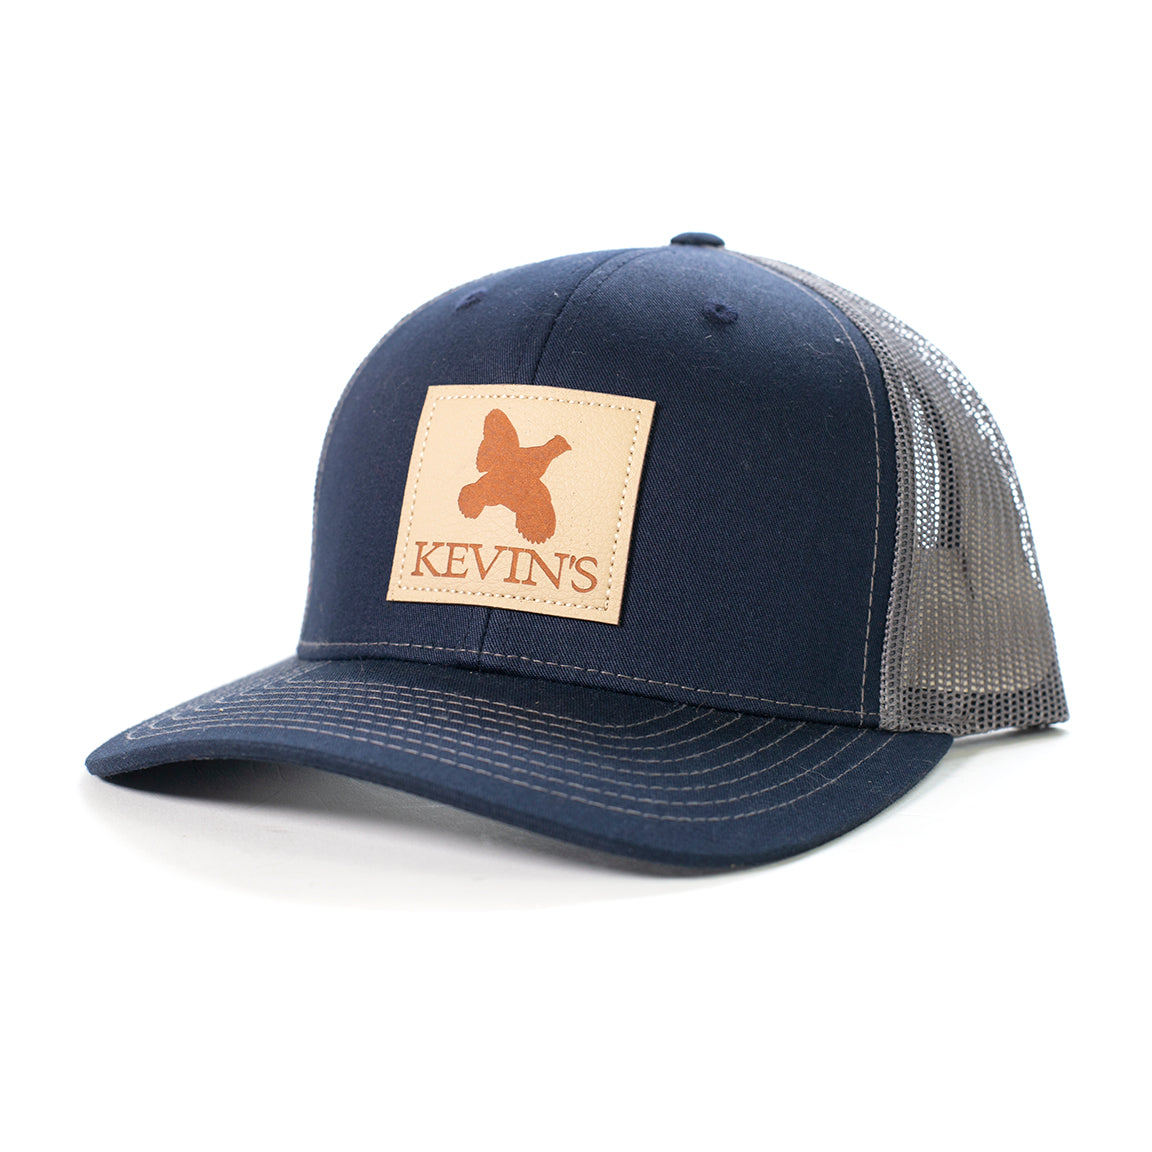 Kevin's Richardson Logo Cap-Men's Accessories-Navy/Charcoal-Kevin's Fine Outdoor Gear & Apparel